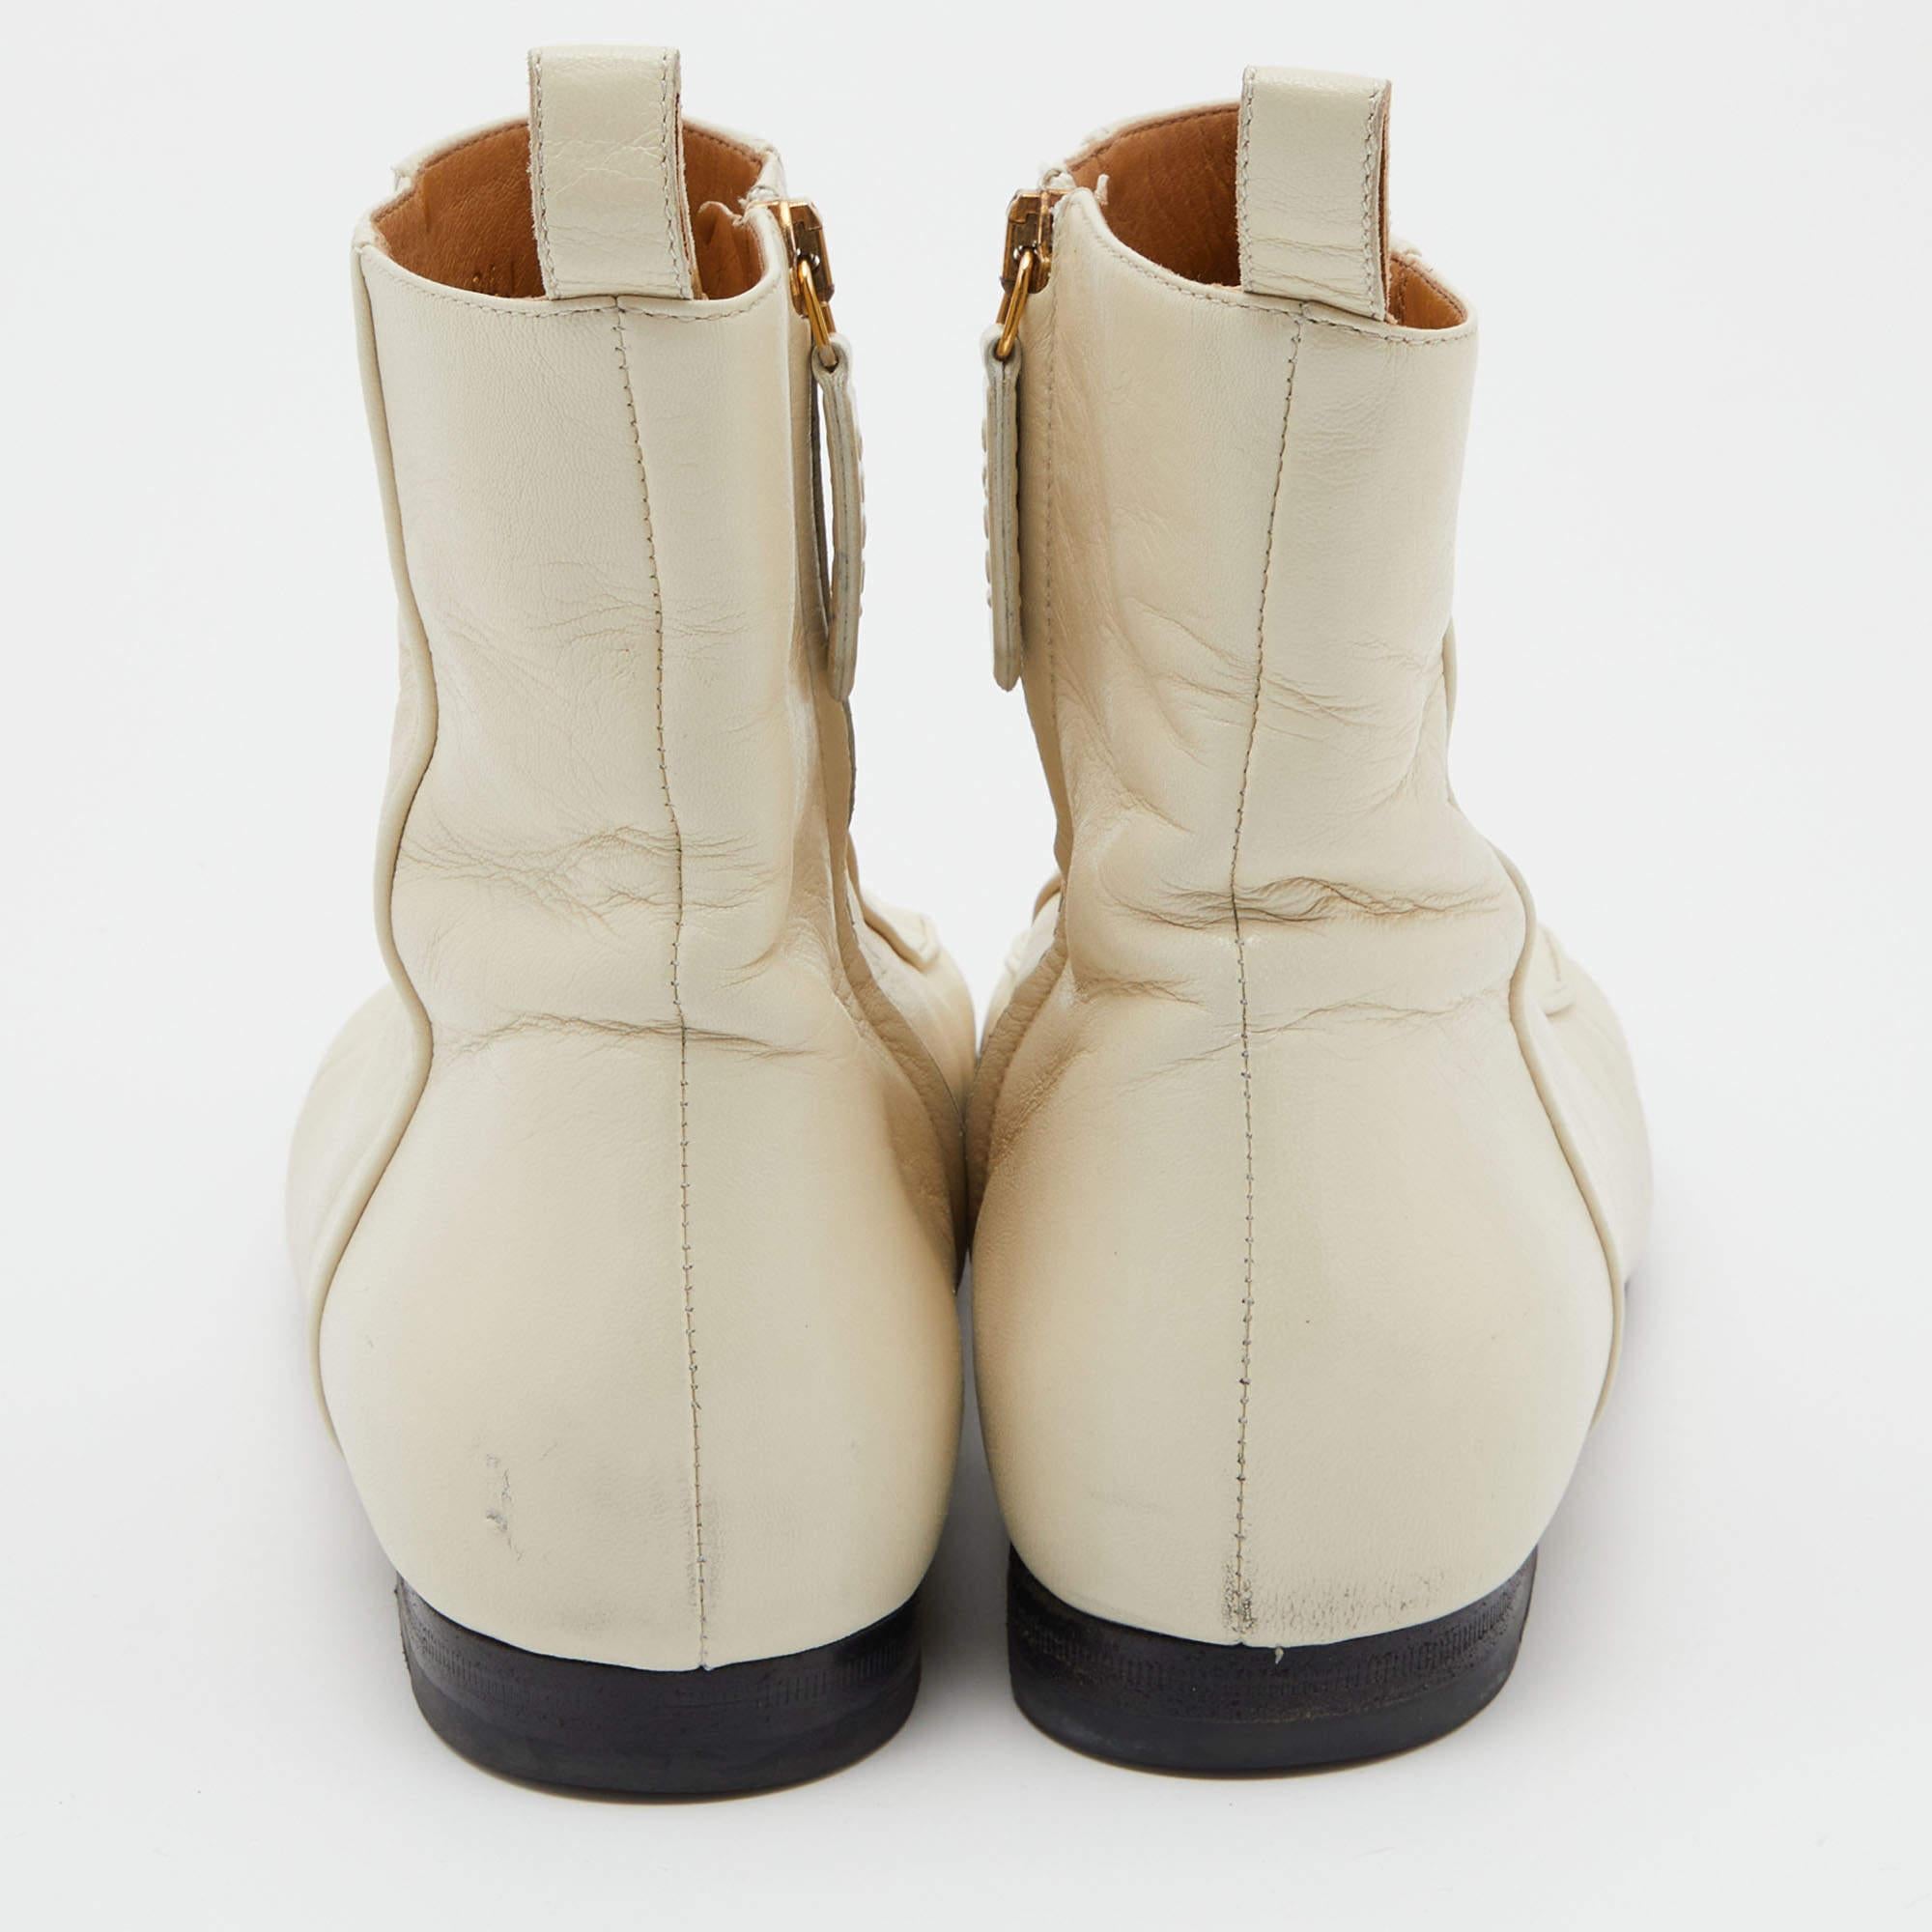 Gucci Cream Leather Horsebit Ankle Boots Size 38 For Sale 2